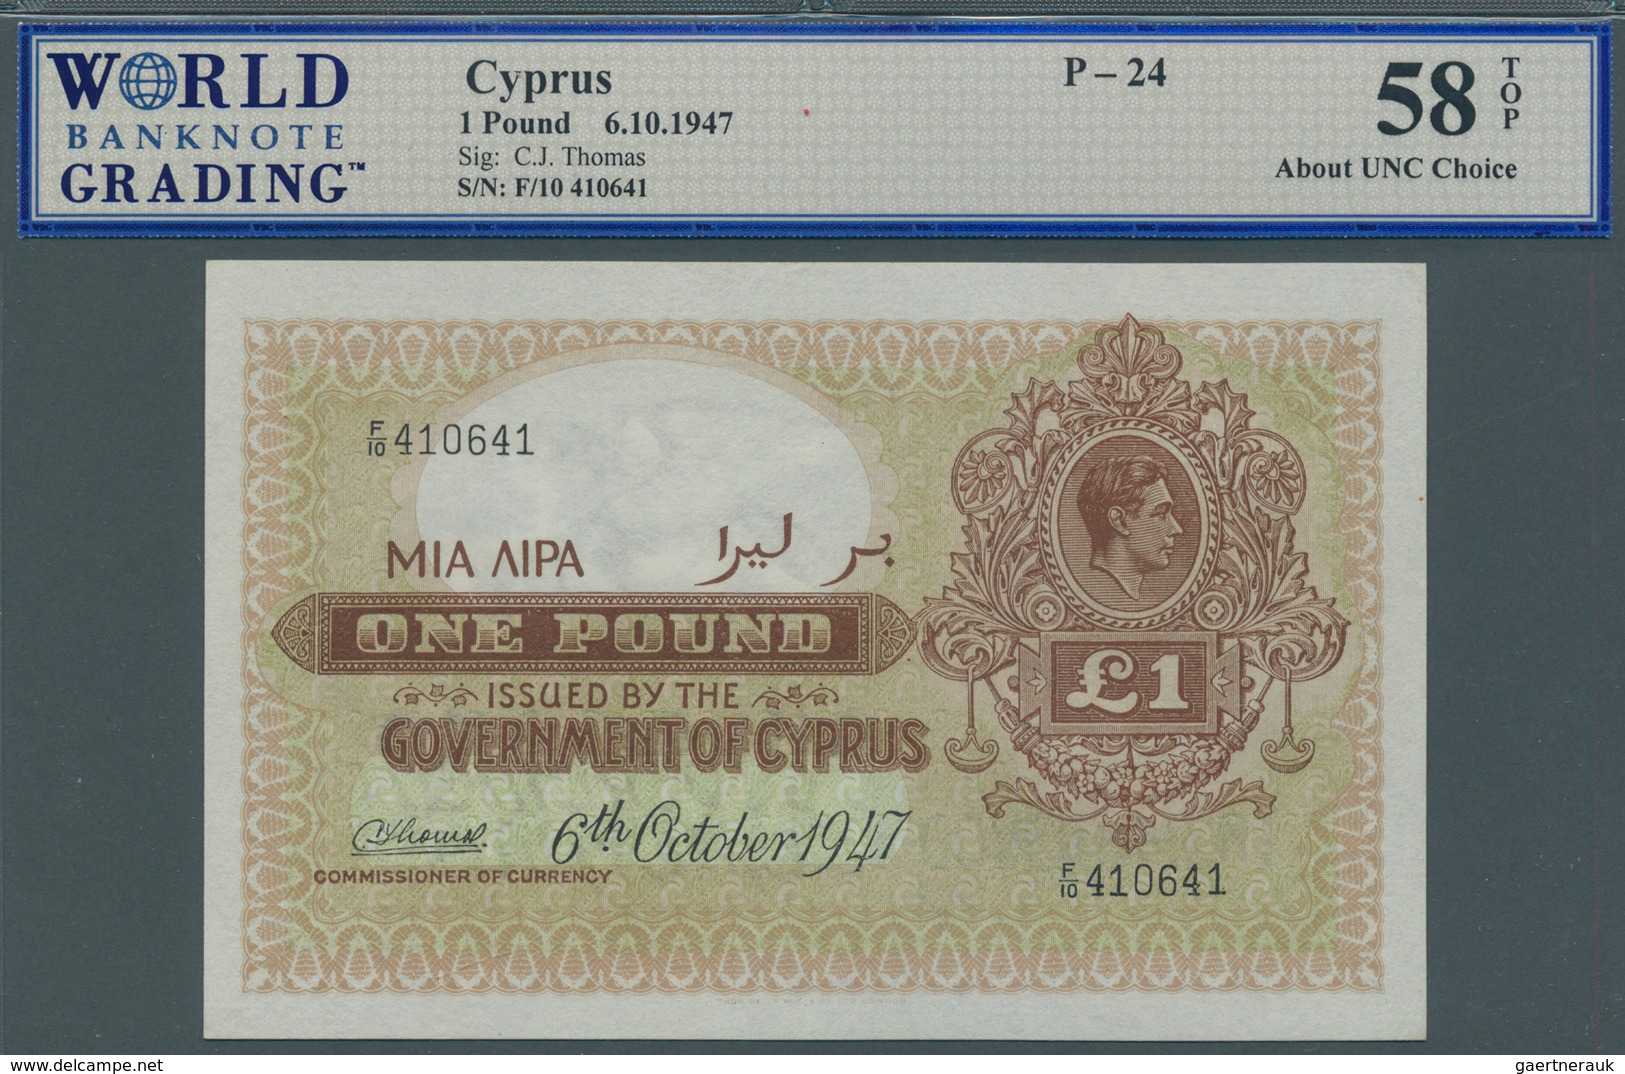 01339 Cyprus / Zypern: 1 Pound 1947, P.24, Minor Spots At Right Border, WBG Grading 58 About UNC Choice TO - Cipro